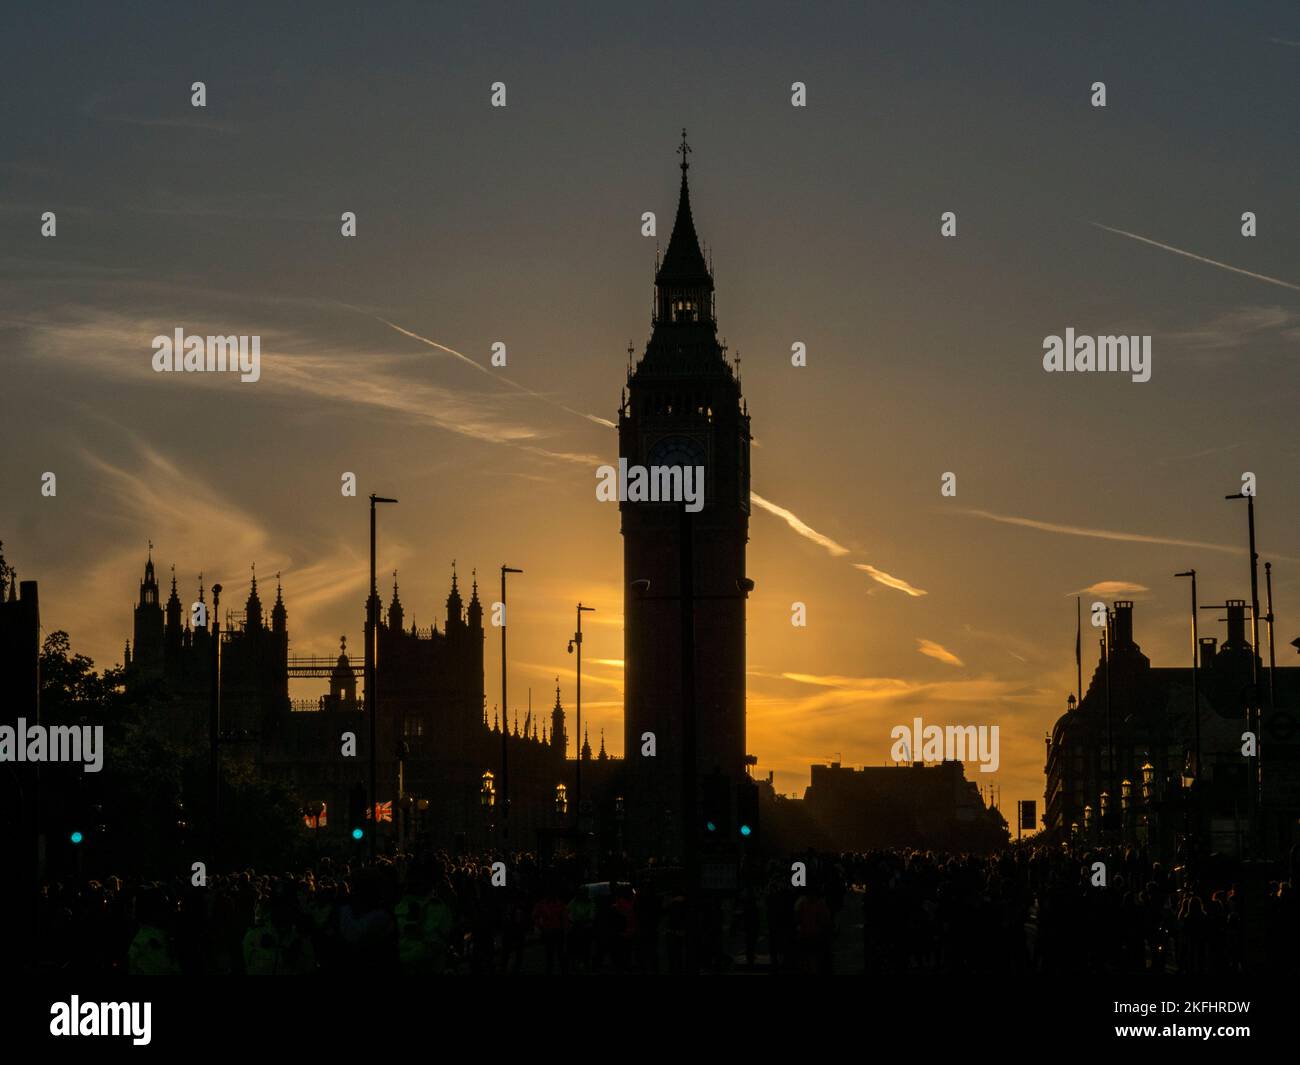 Elizabeth Tower or Big Ben in silouette as the sun sets over London, England. Stock Photo